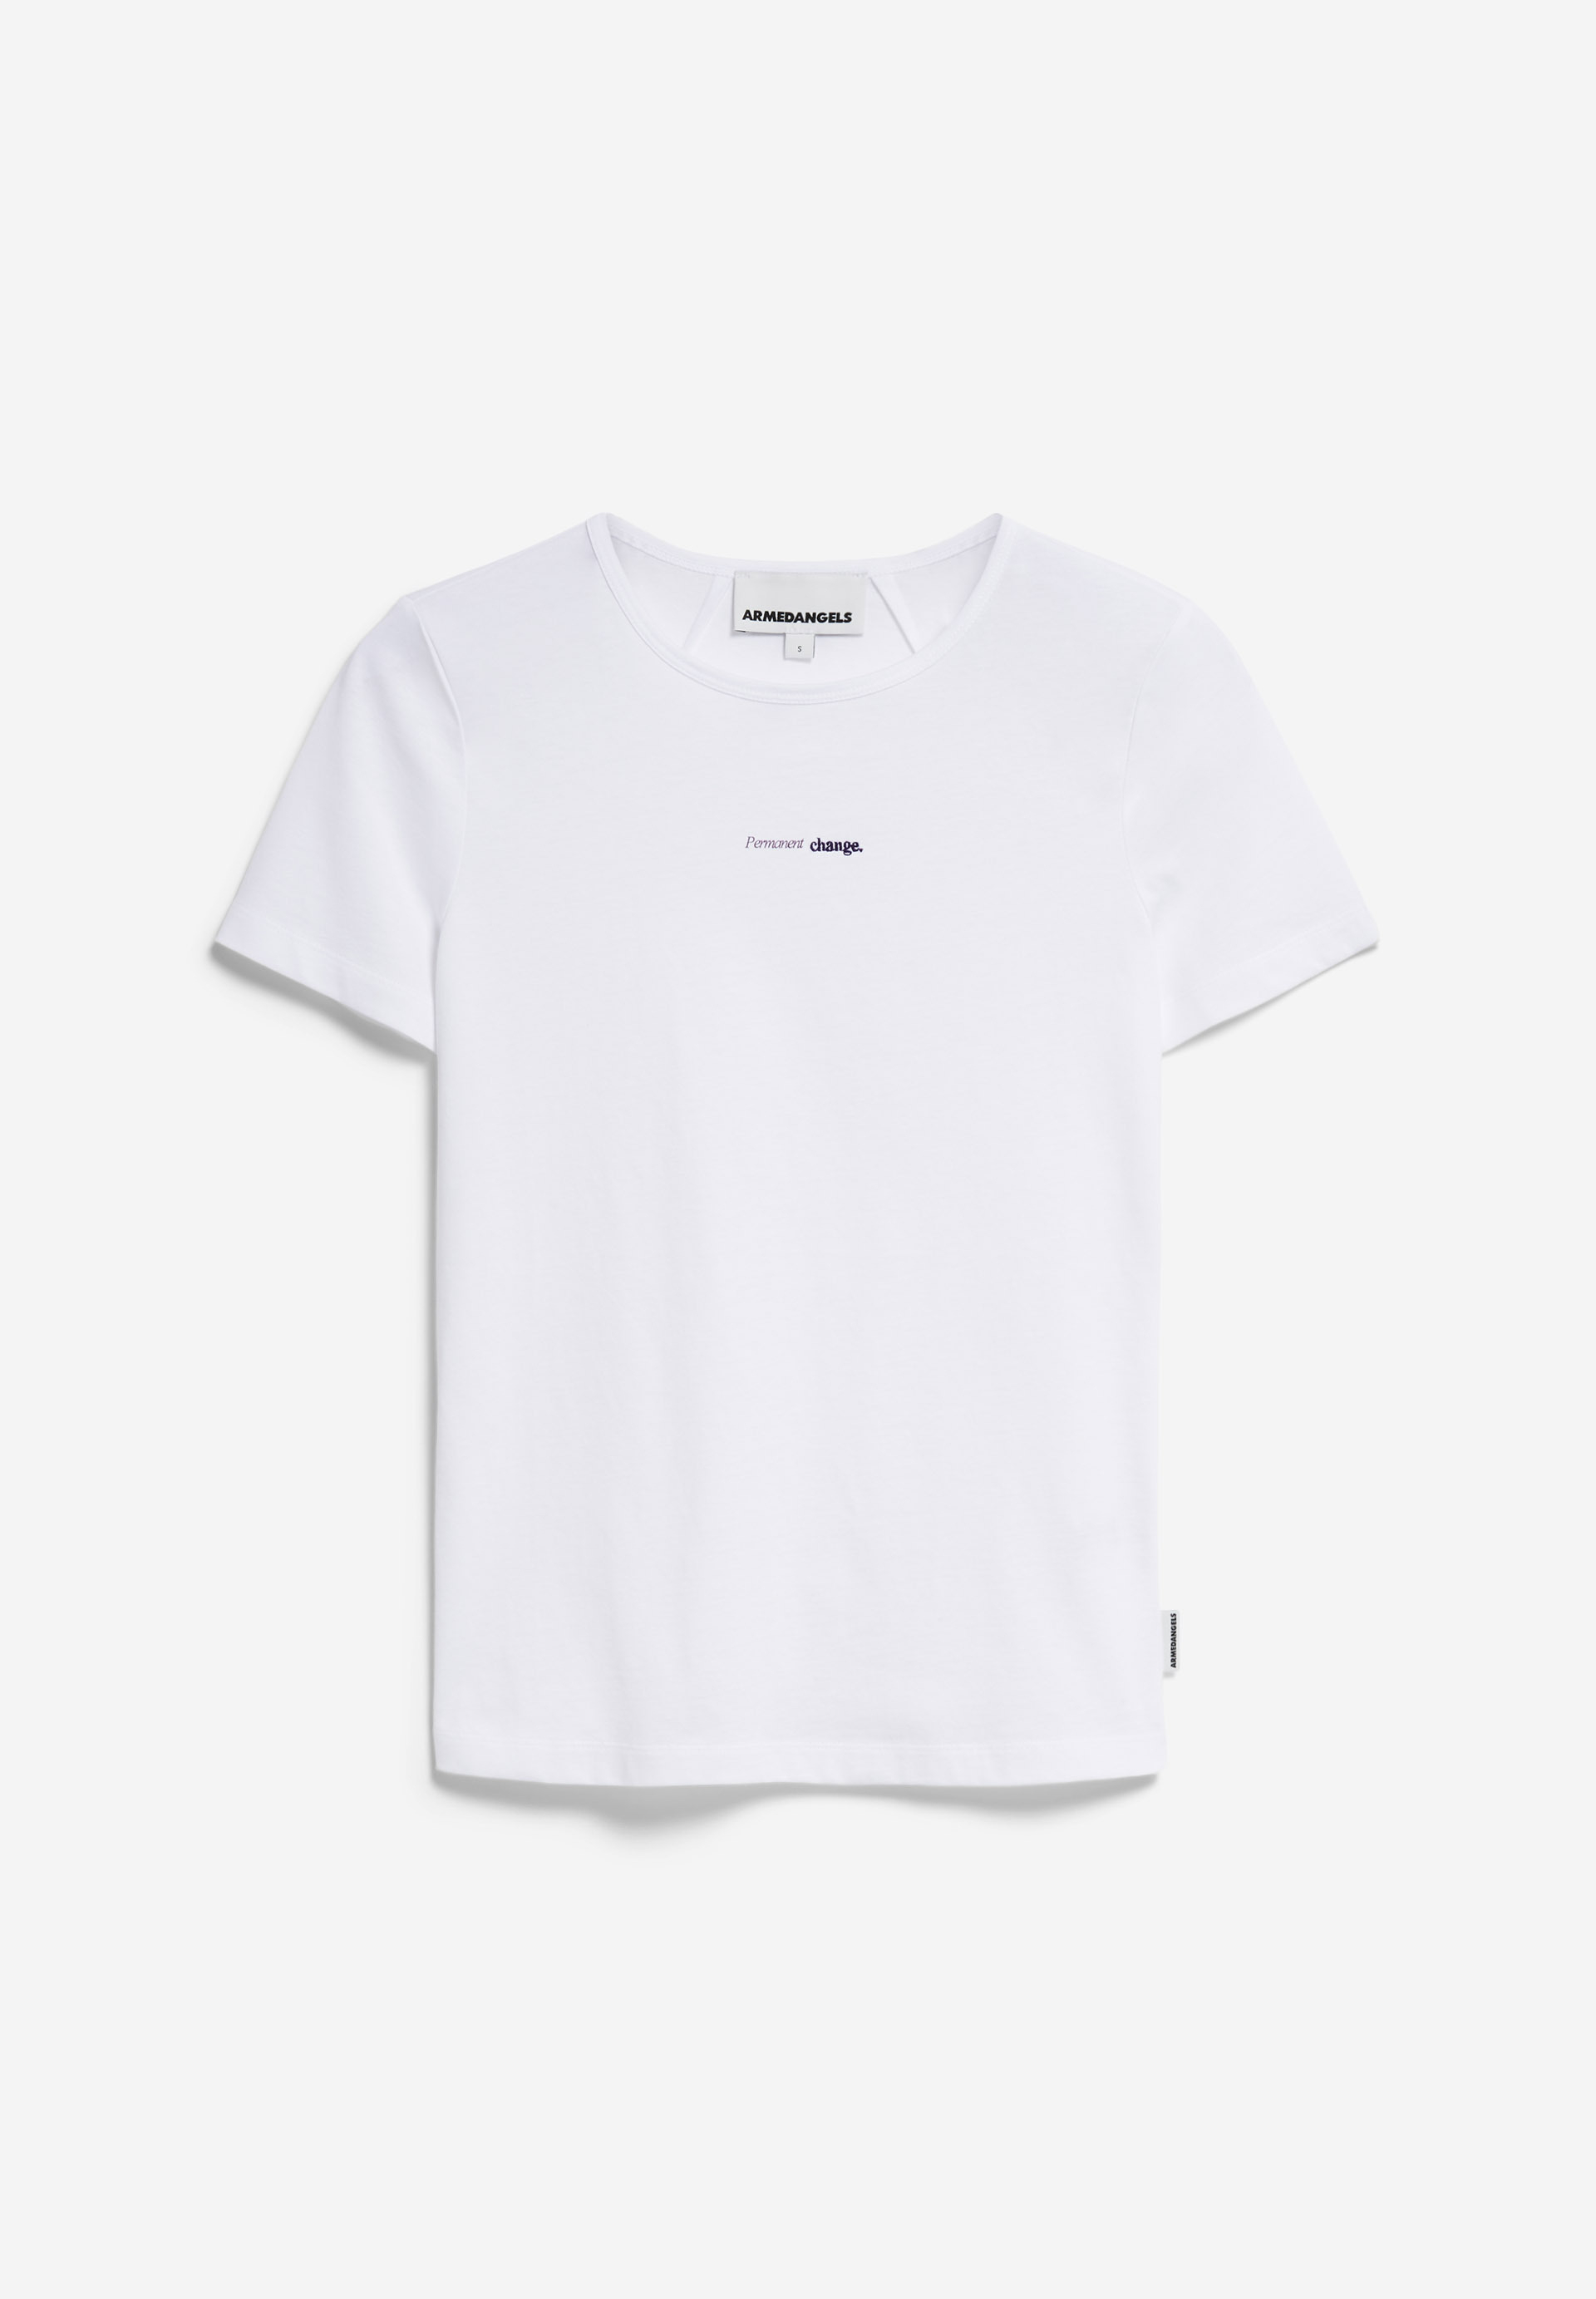 EBAANORA EXCEPT CHANGE T-Shirt Slim Fit made of Organic Cotton